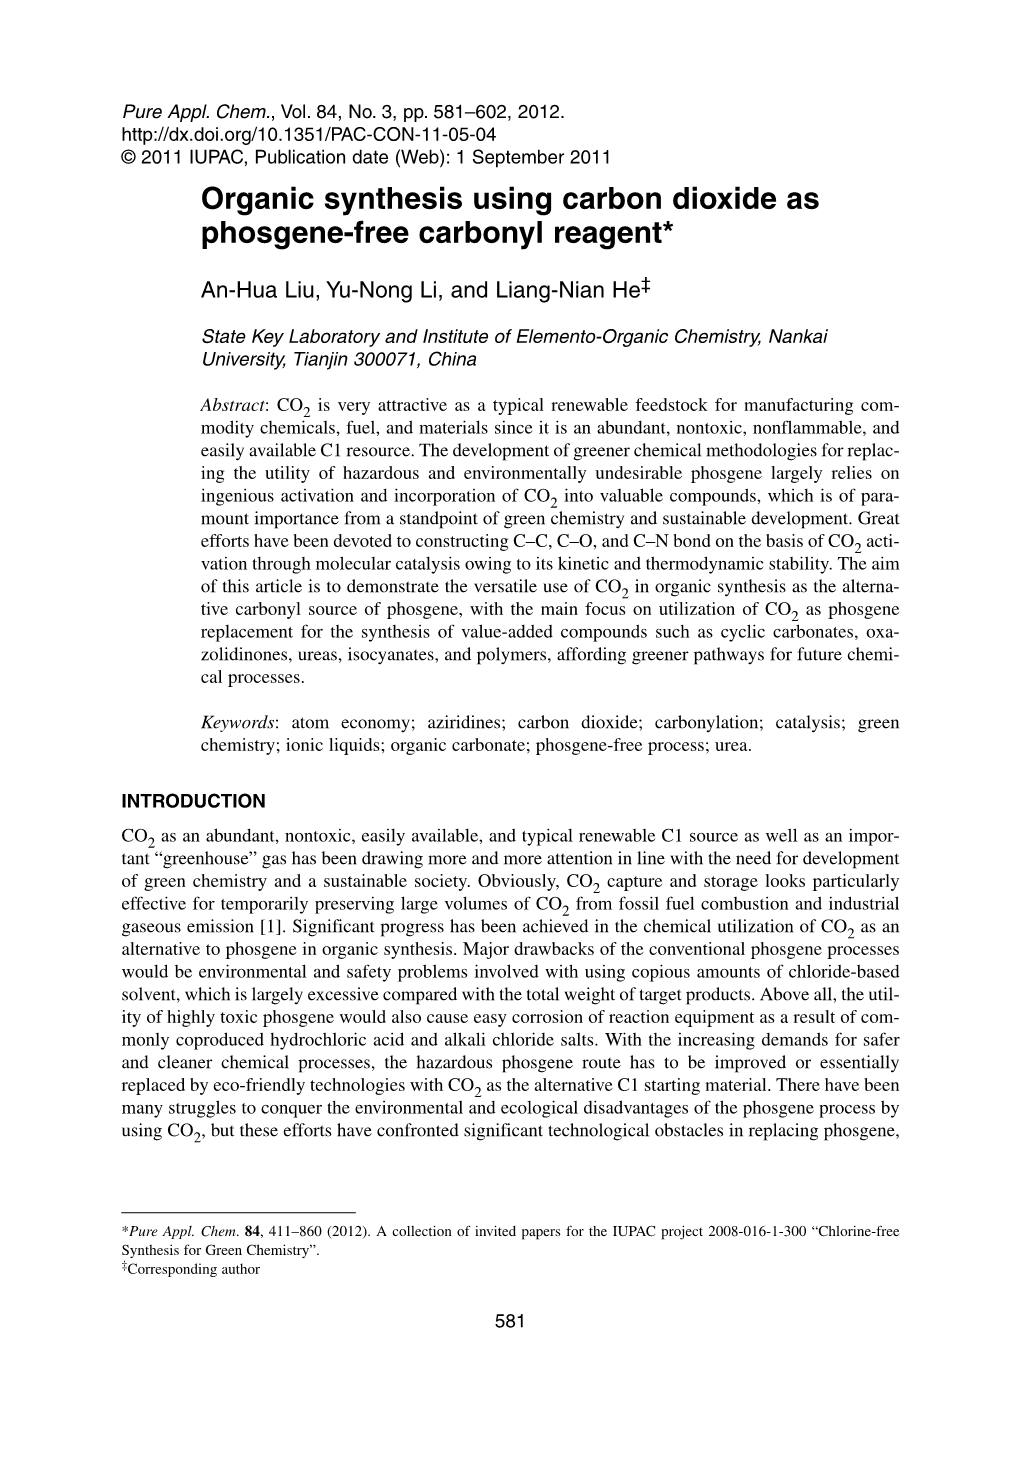 Organic Synthesis Using Carbon Dioxide As Phosgene-Free Carbonyl Reagent*